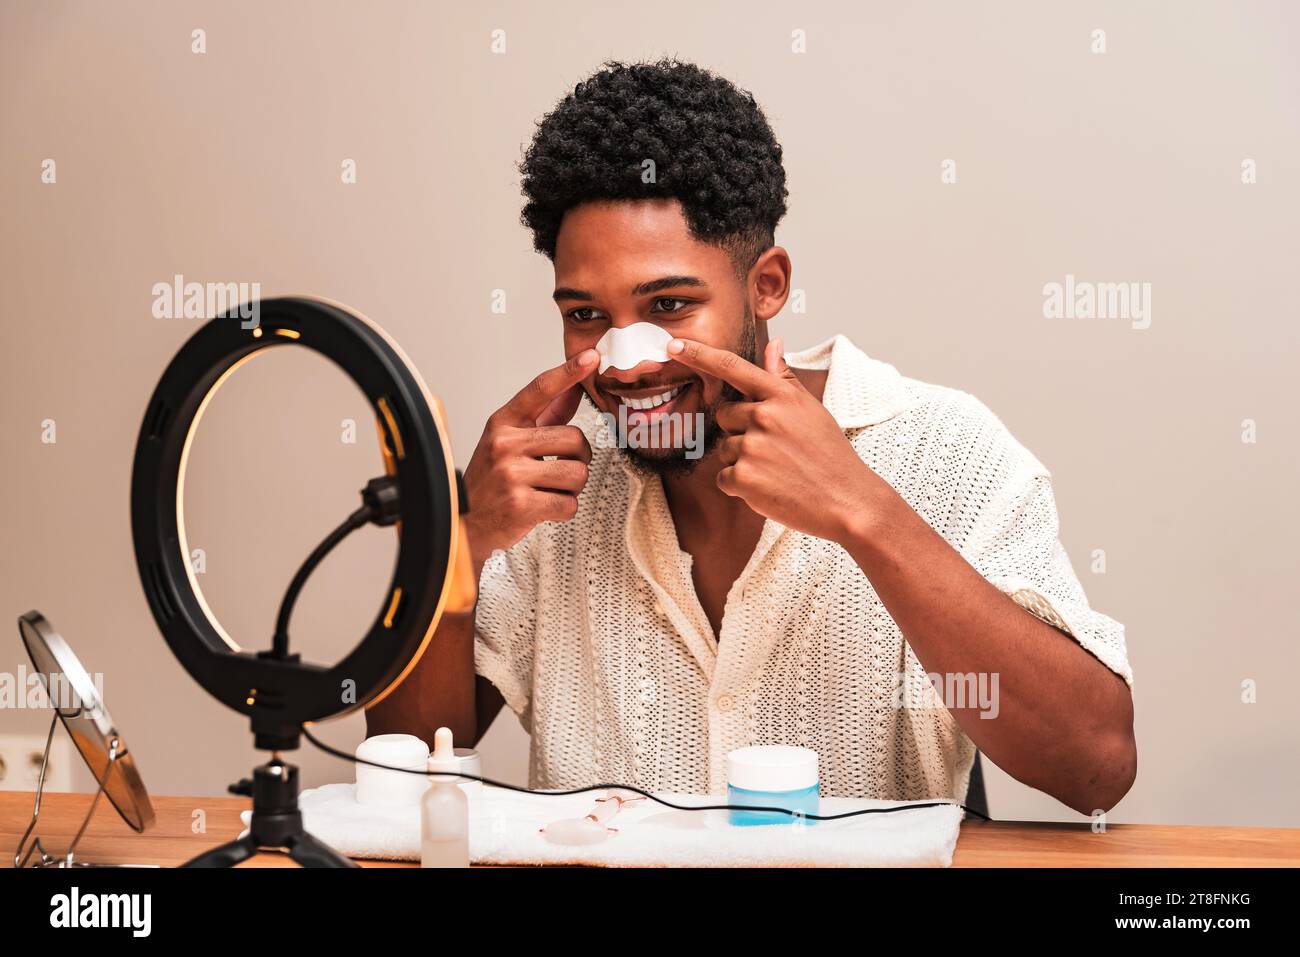 A cheerful young latin man applies a nose strip for skincare in front of a ring light, promoting self-care. Stock Photo